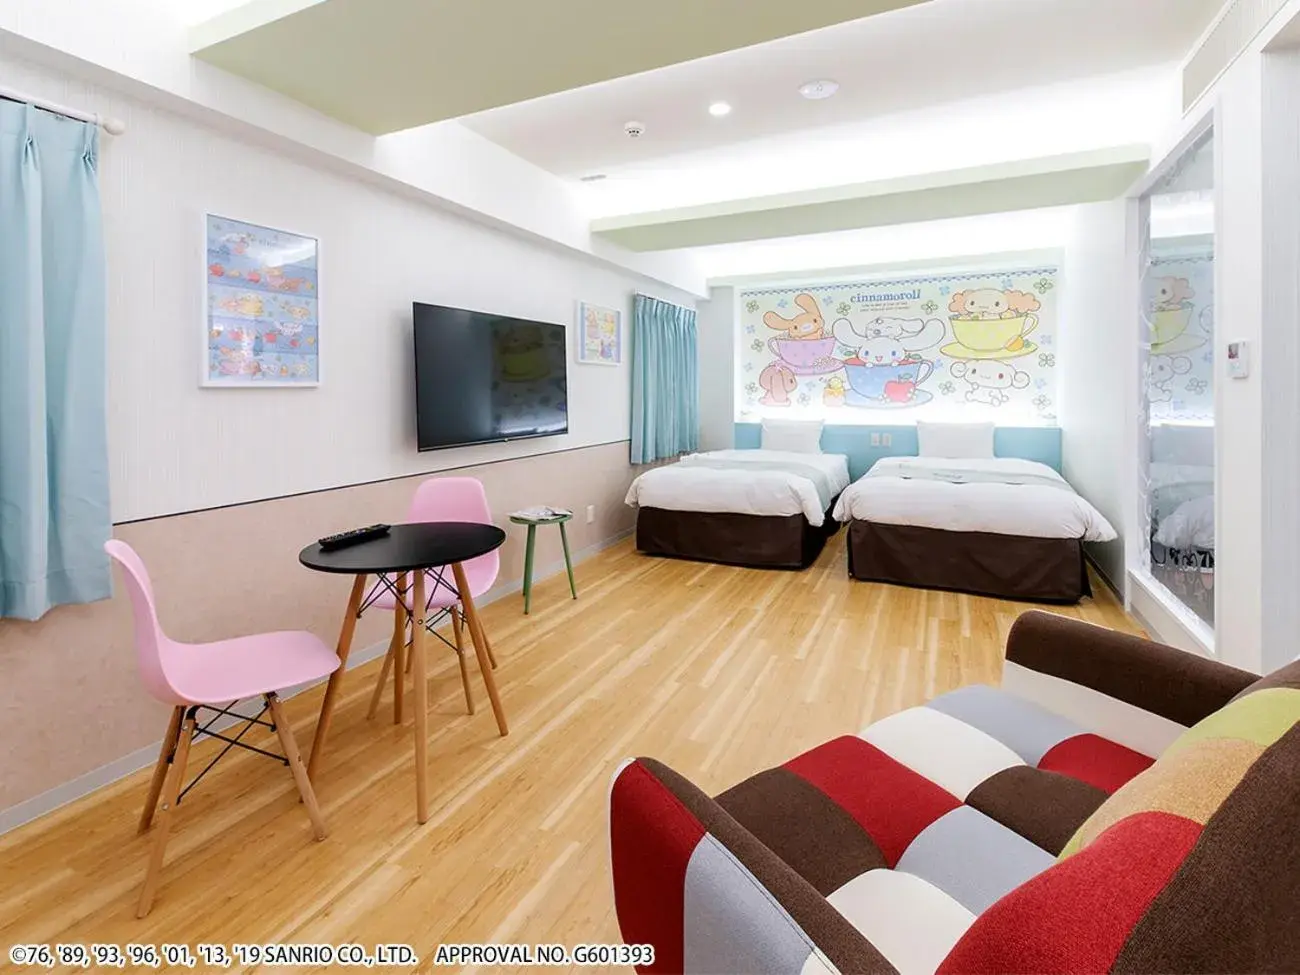 Living room in Hotel Okinawa With Sanrio Characters